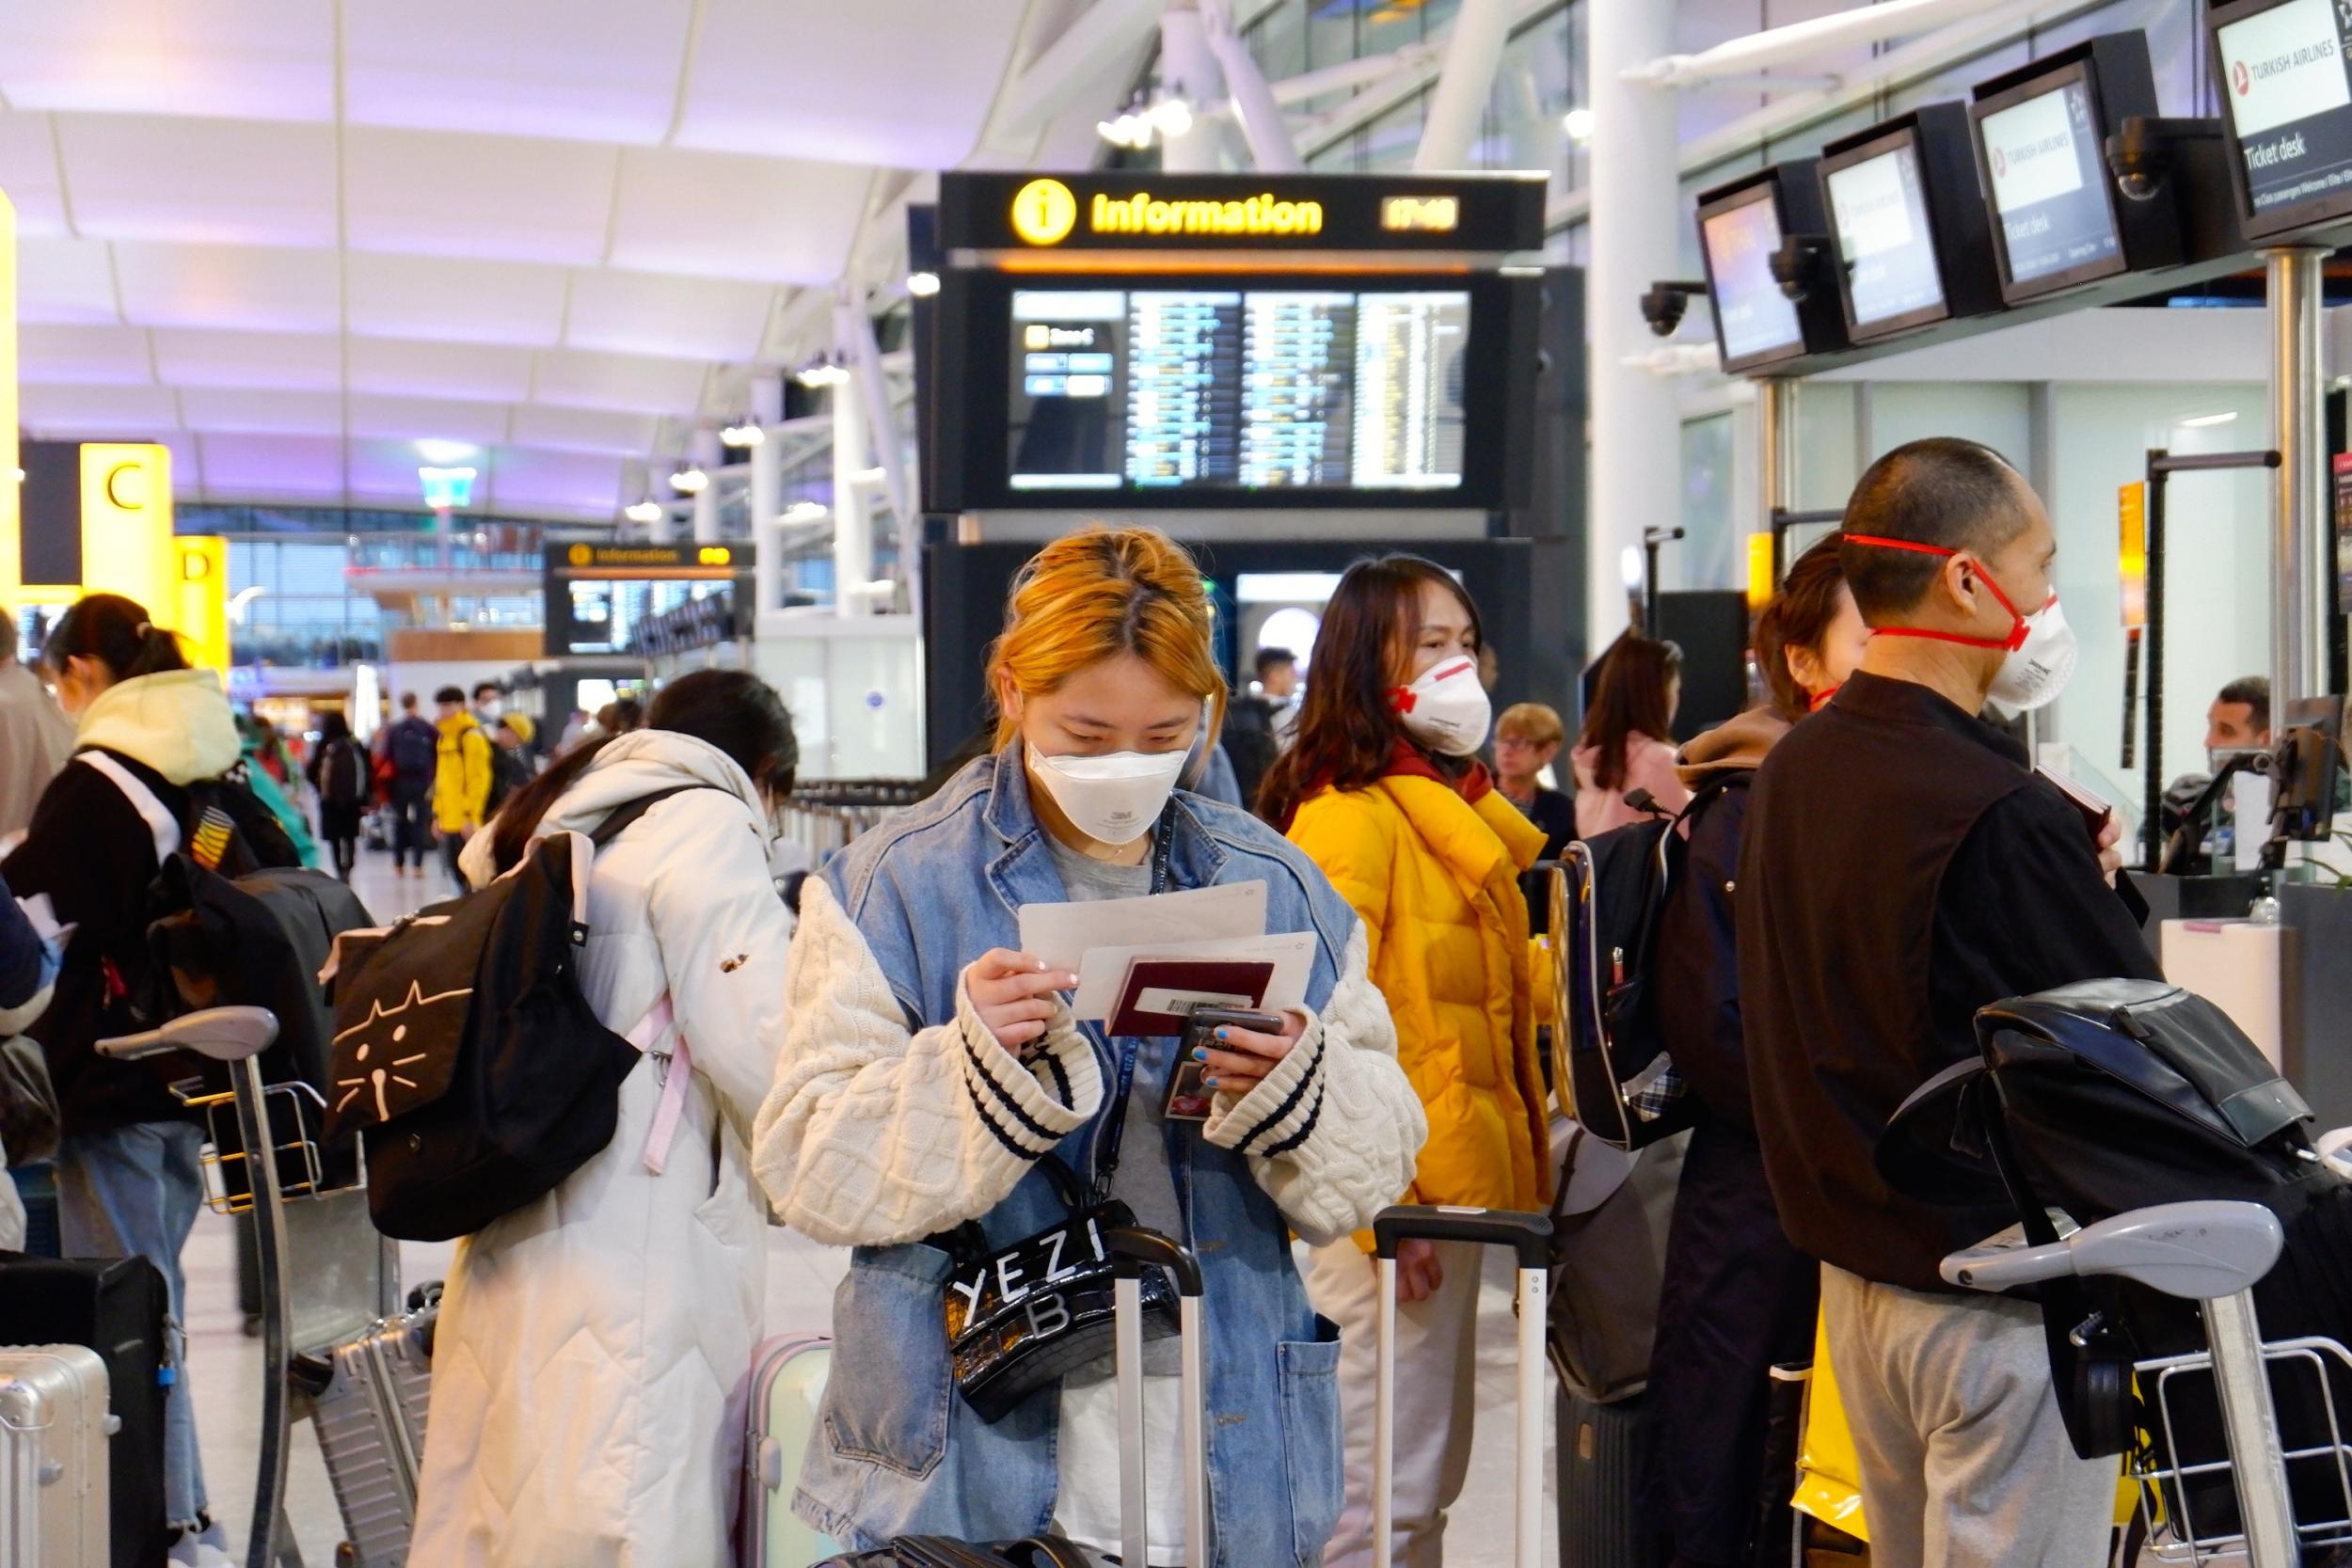 International students awaiting flights at Heathrow – many have struggled to get a ticket while others have had their bookings cancelled altogether